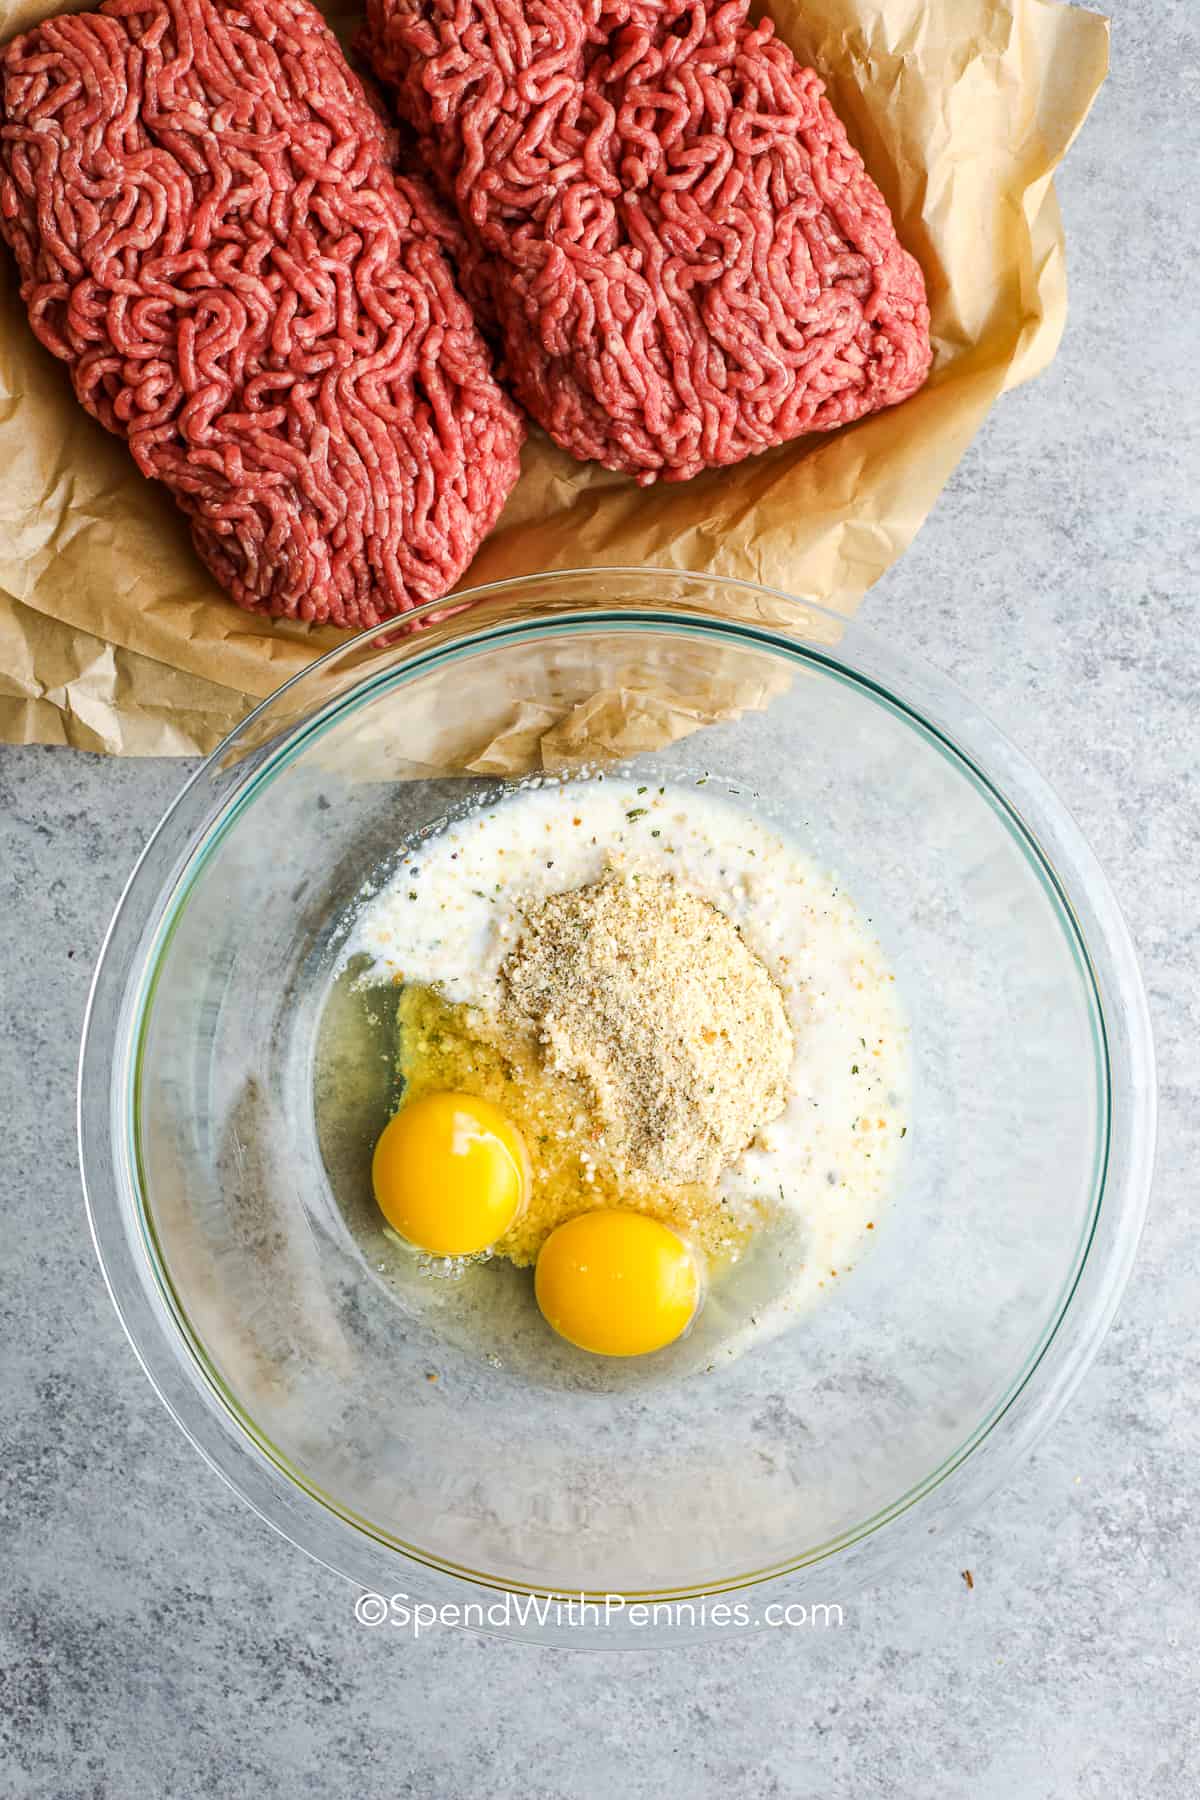 Mixing the eggs, breadcrumbs and milk to make meatloaf